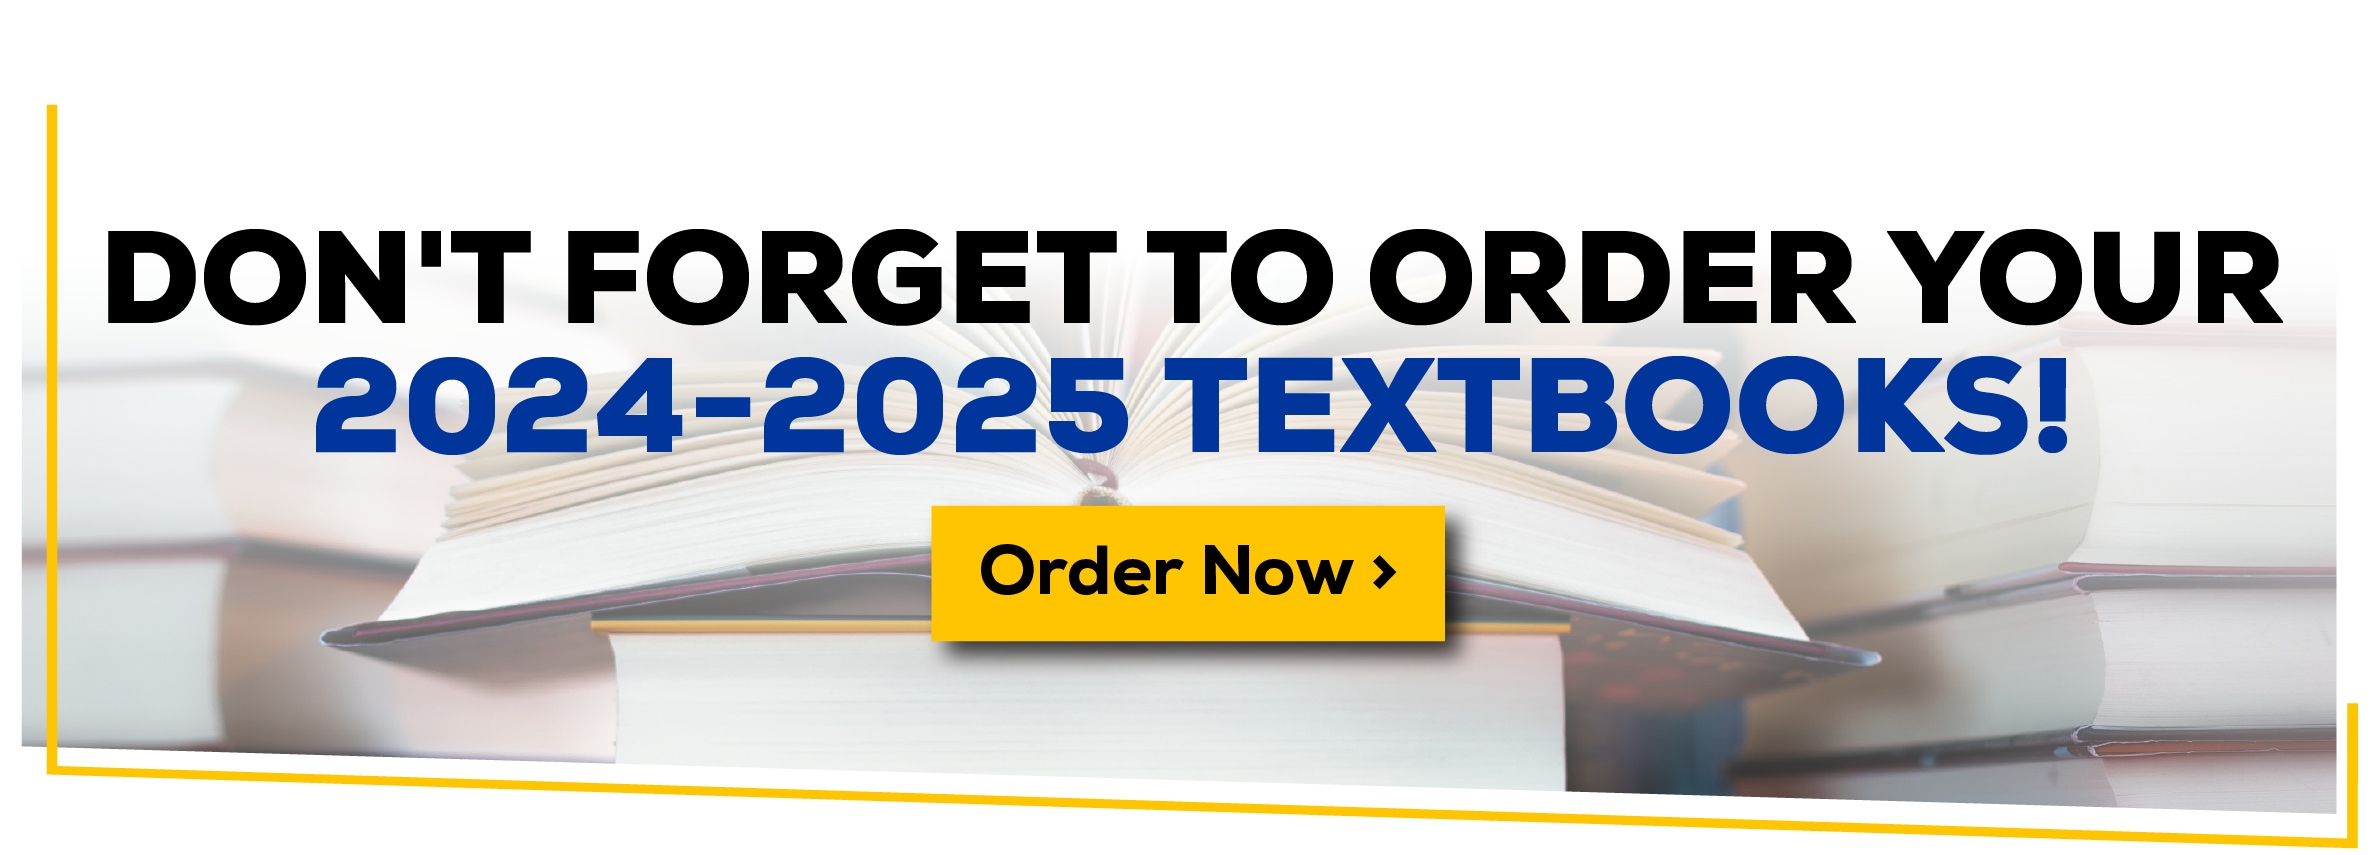 Don't forget to order your 2024-2025 textbooks! Order now.